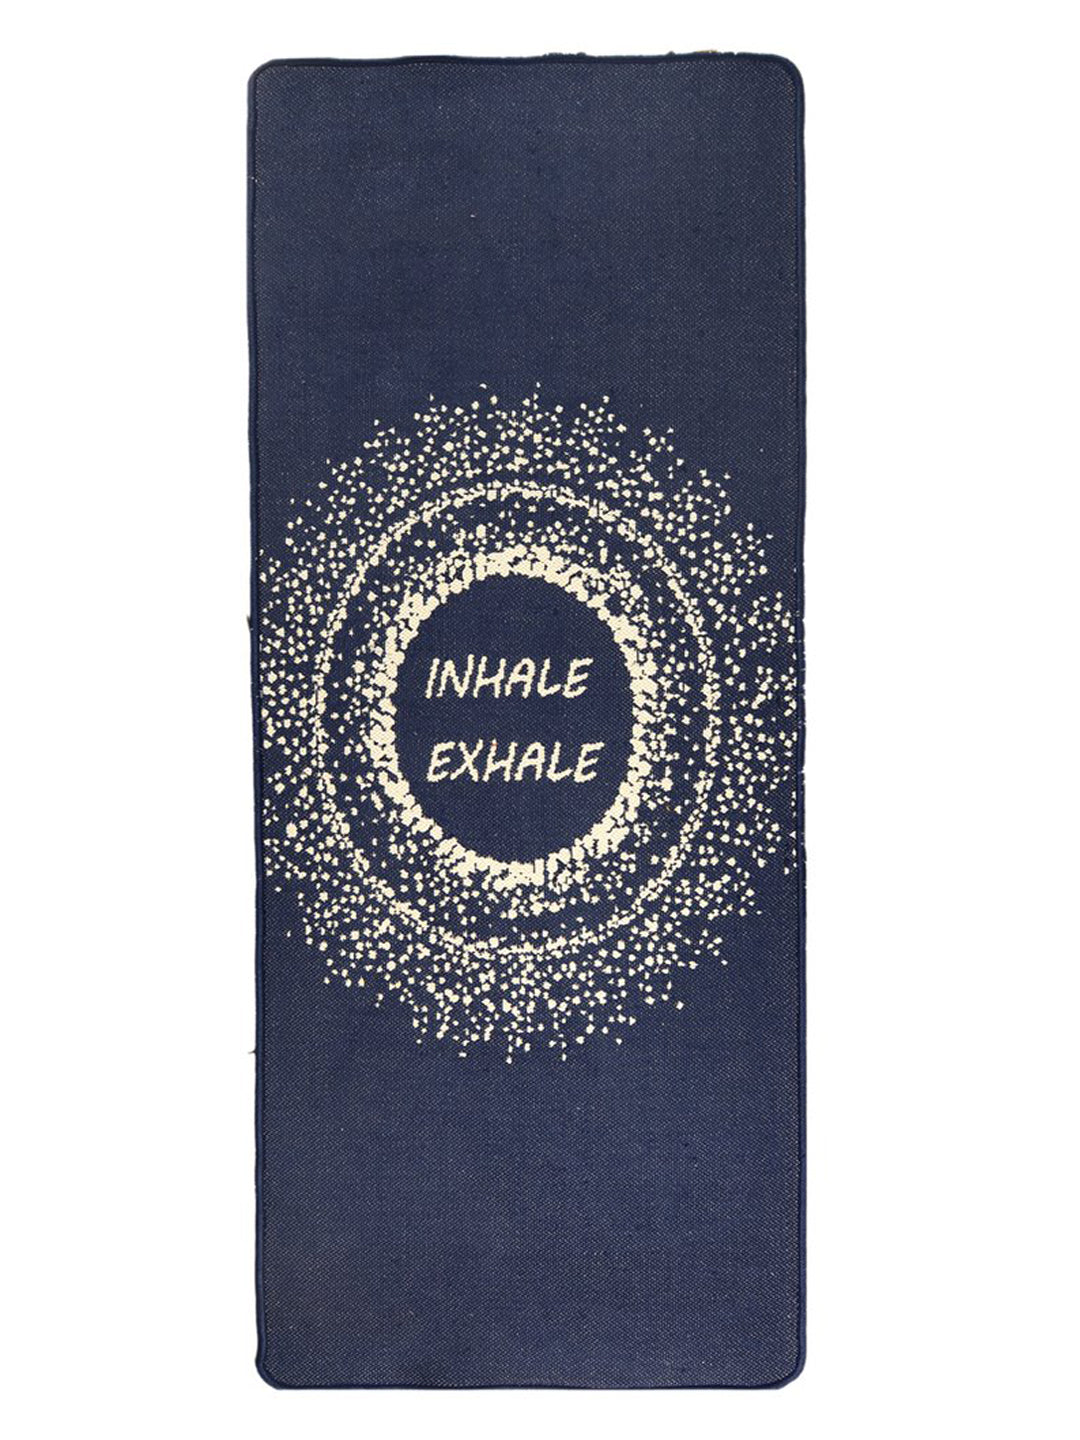 Rectangle Plain Cotton Yoga Mats, Mat Size: 28inchs X 78inchs at Rs  550/piece in New Delhi